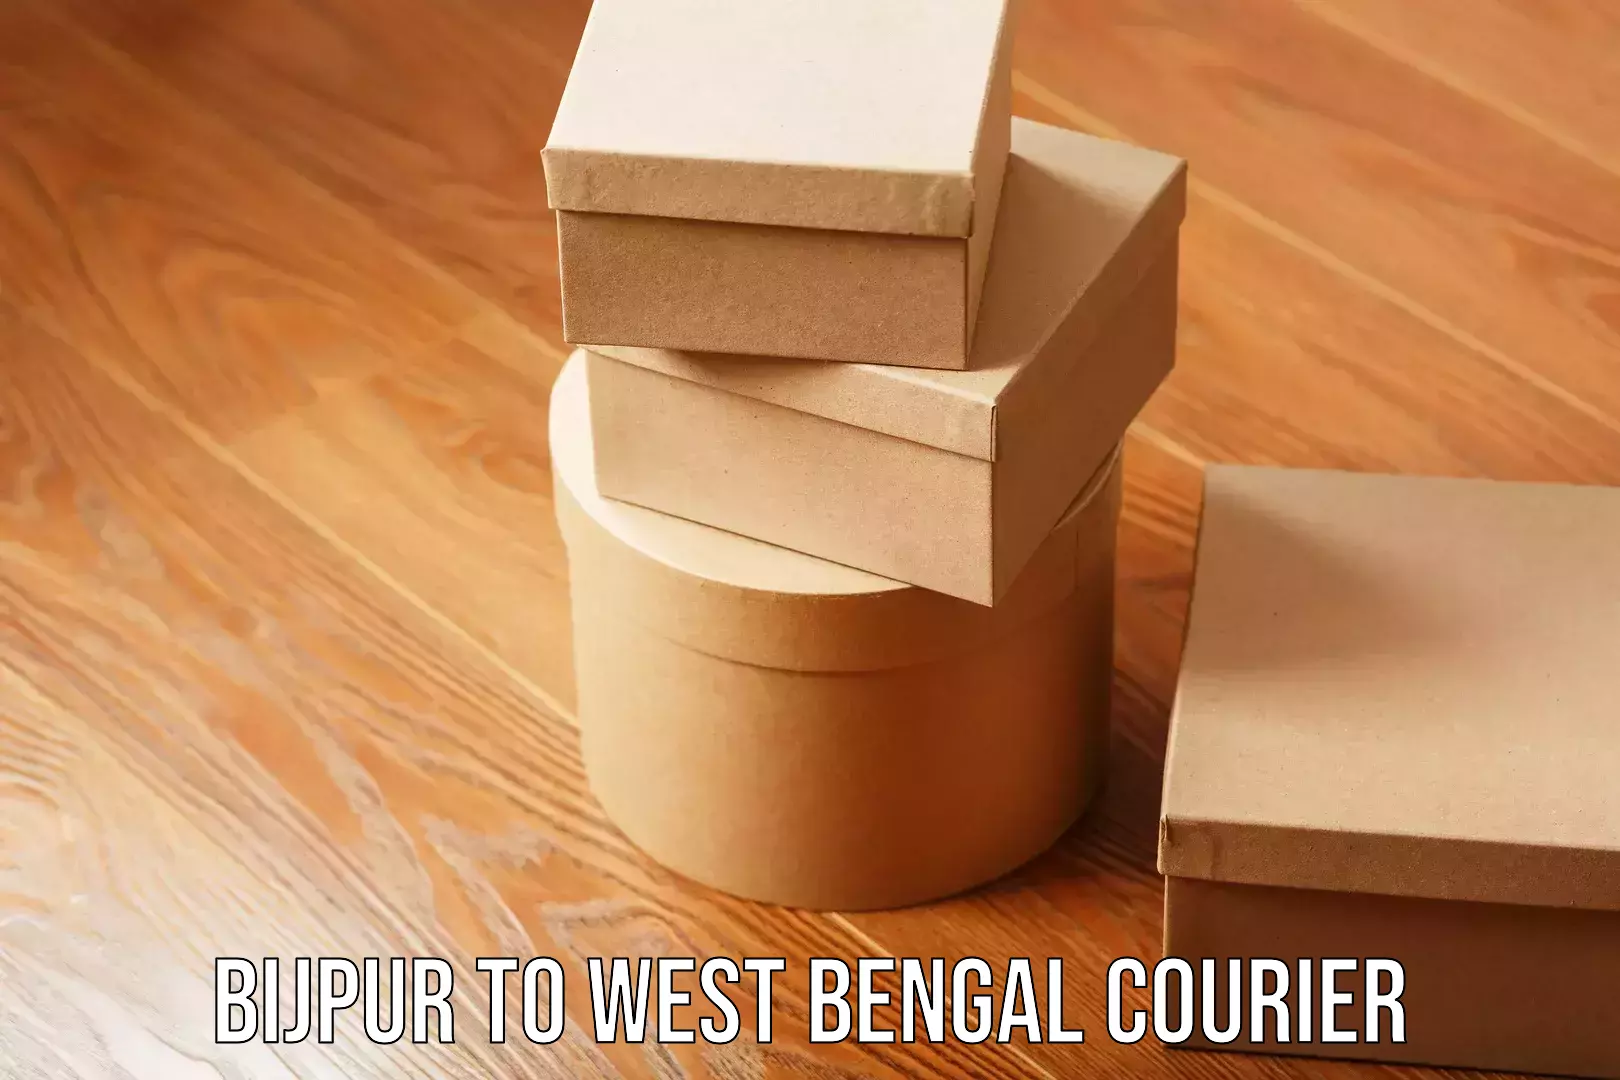 Multi-service courier options Bijpur to West Bengal